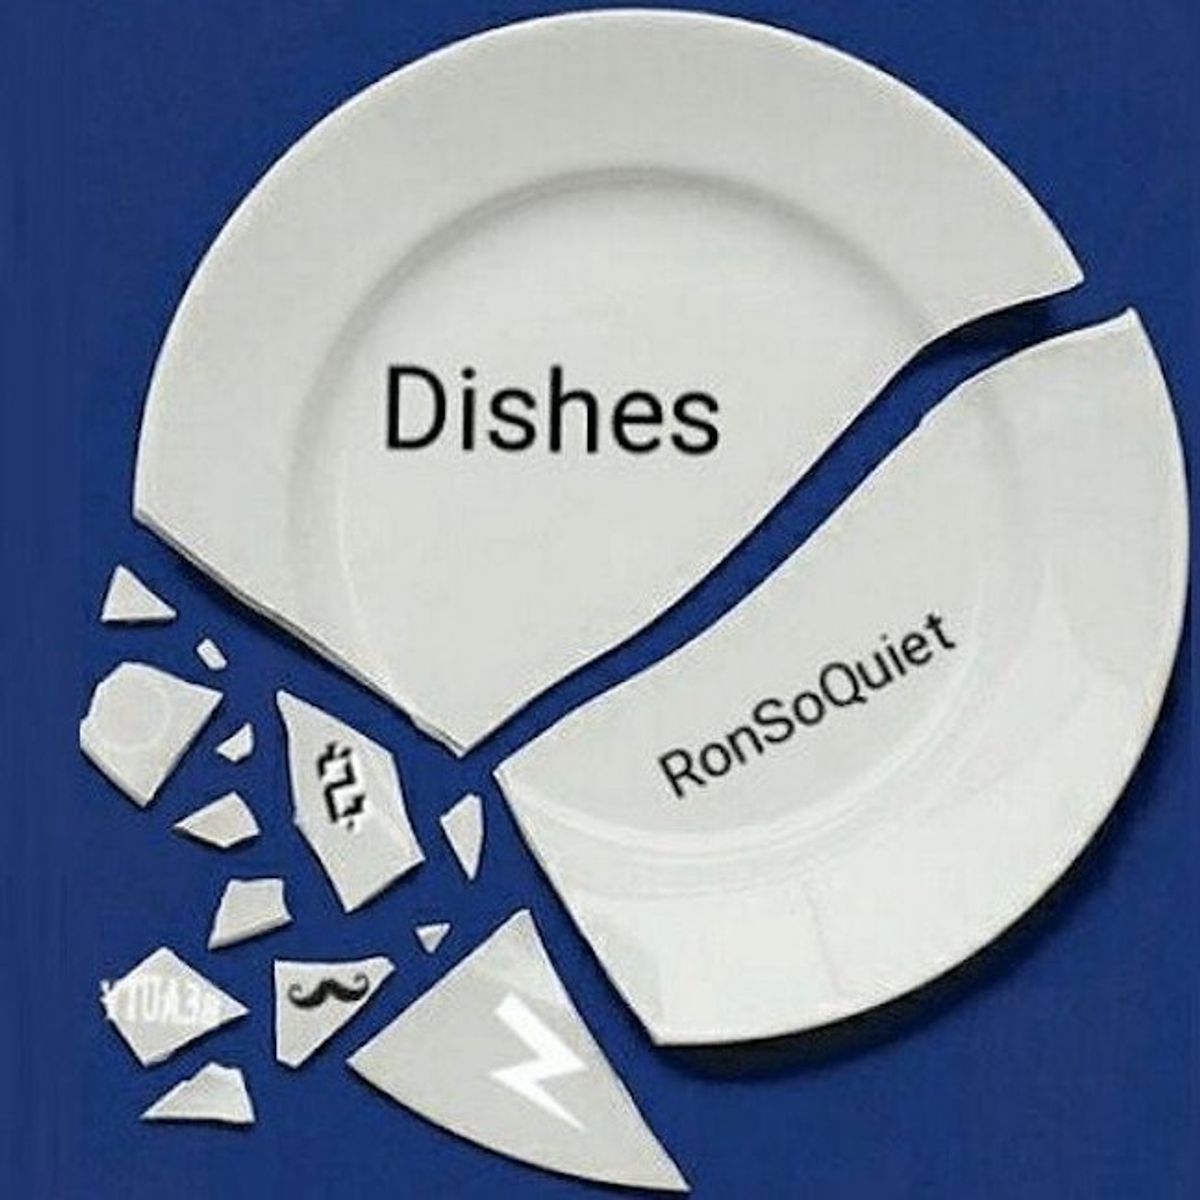 Dishes by RonSoQuiet Out Now